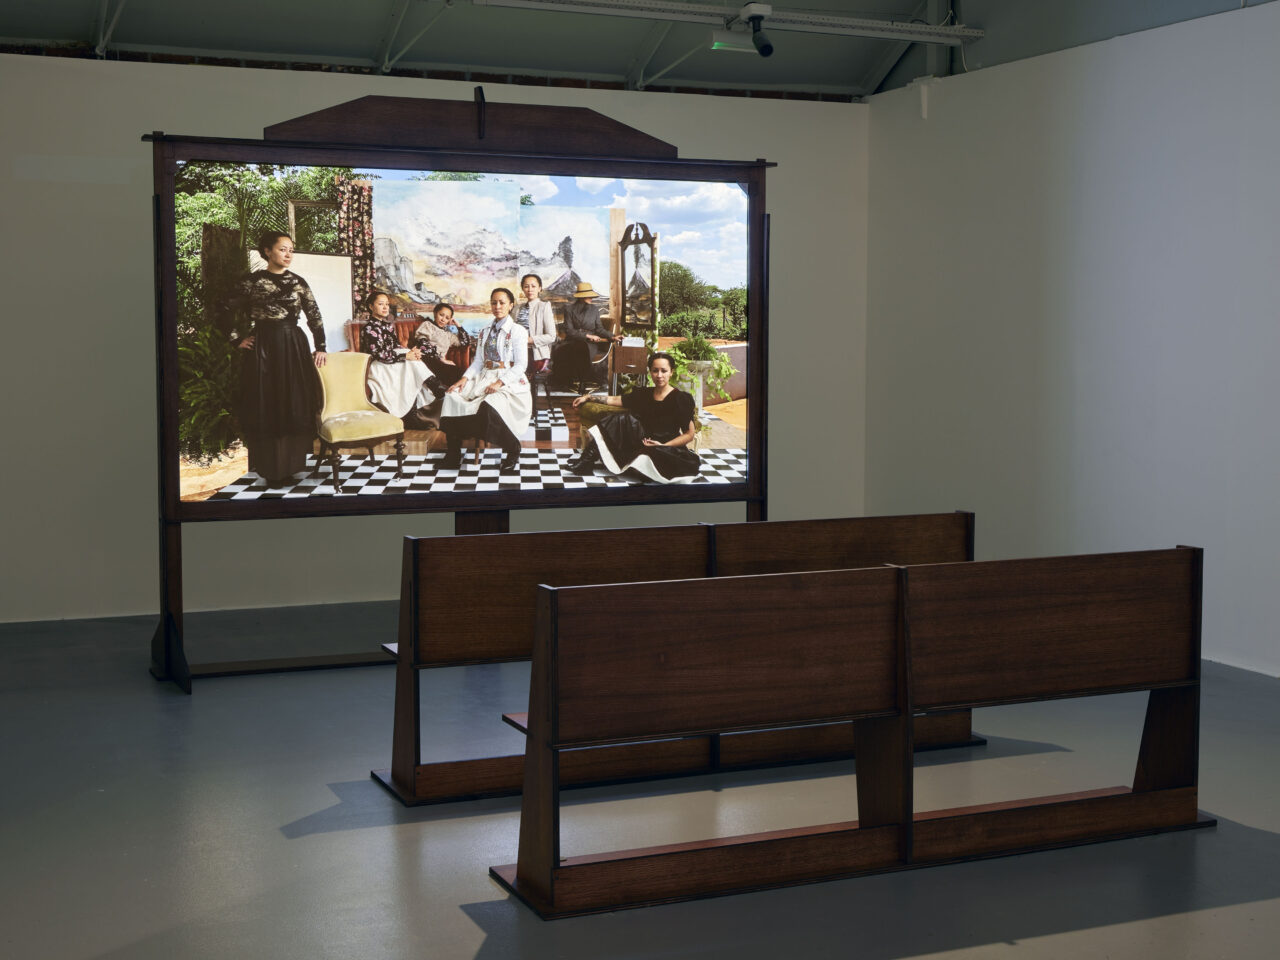 a projection screen which consists of the artist as seven different characters, in front of the screen are bespoke benches, made to mimic a Victorian design